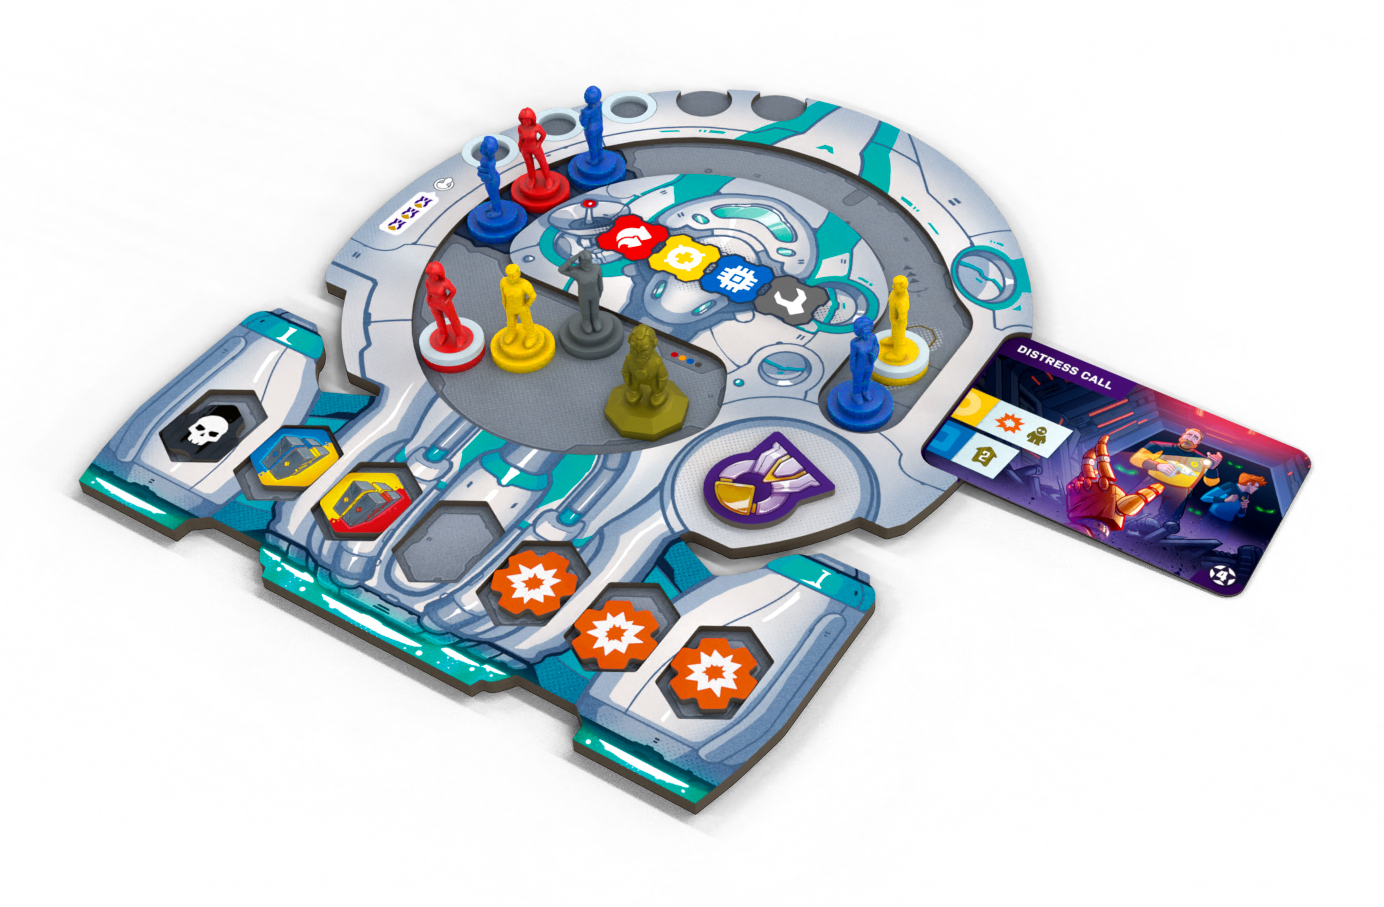 Starship Captains board art by Czech Games Edition